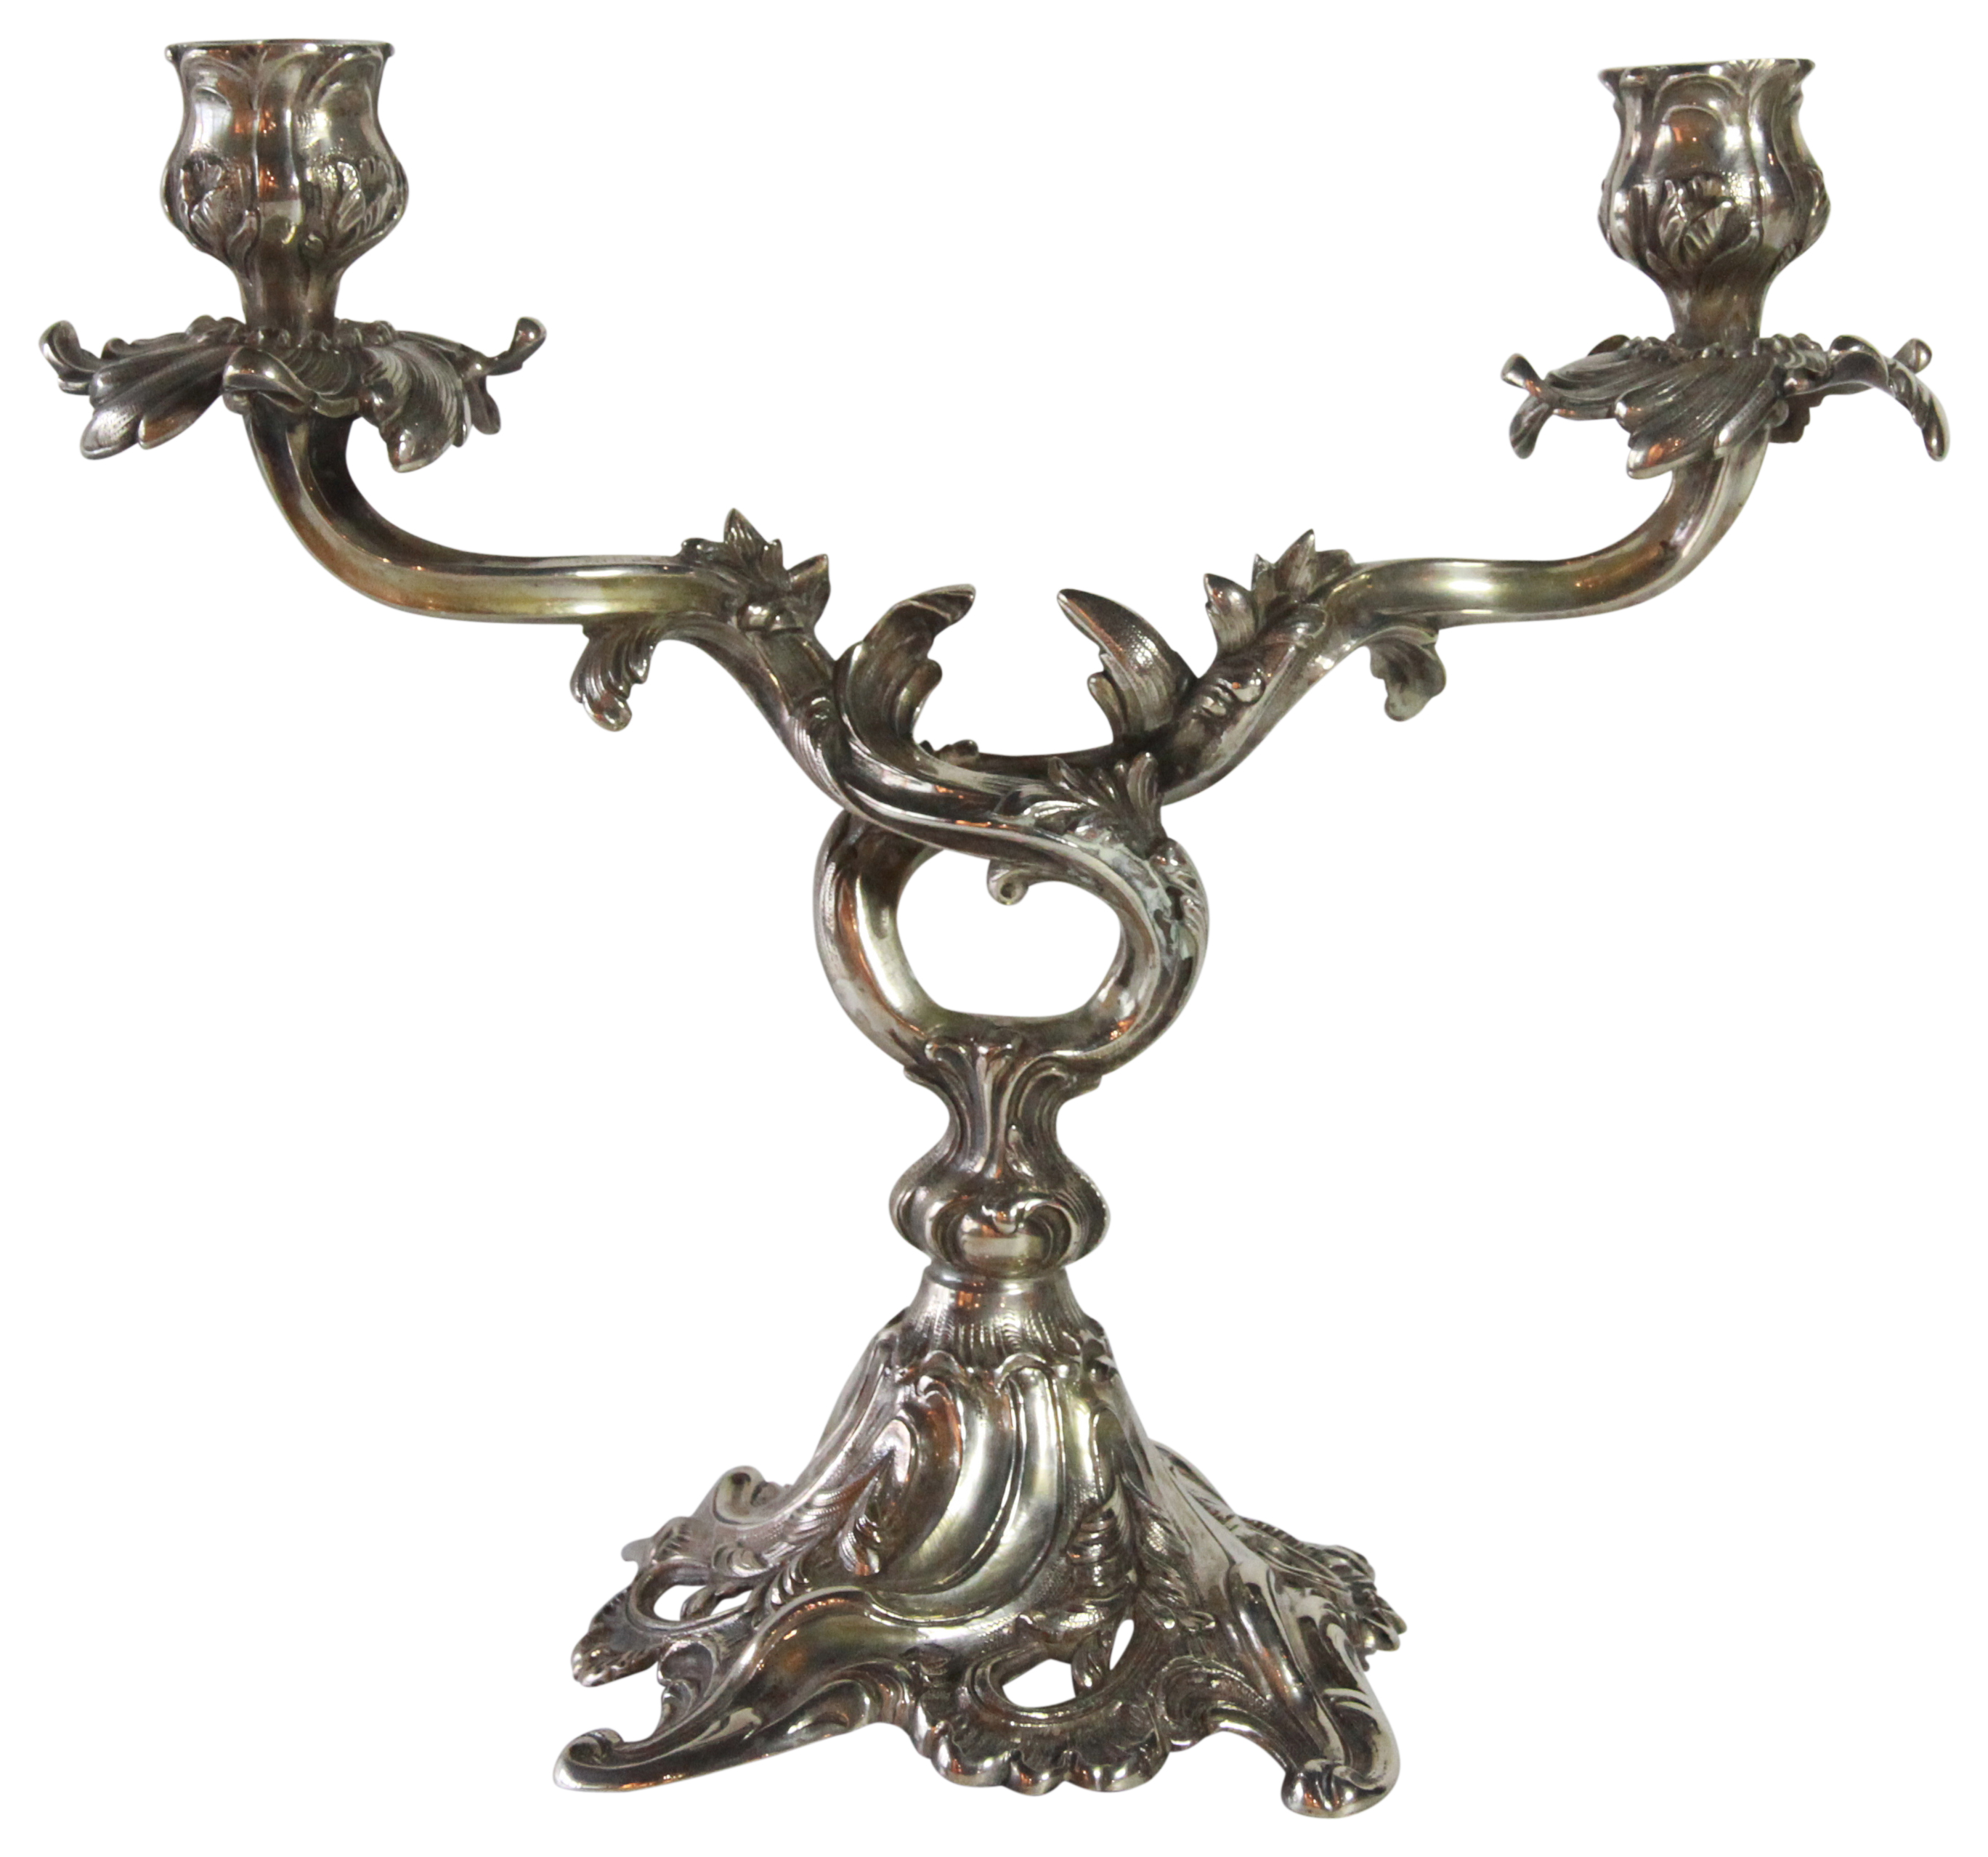 A rococo style silver candelabrum - German 1880. (H: 26cm) (1156 grams), PROVENANCE: Property of a